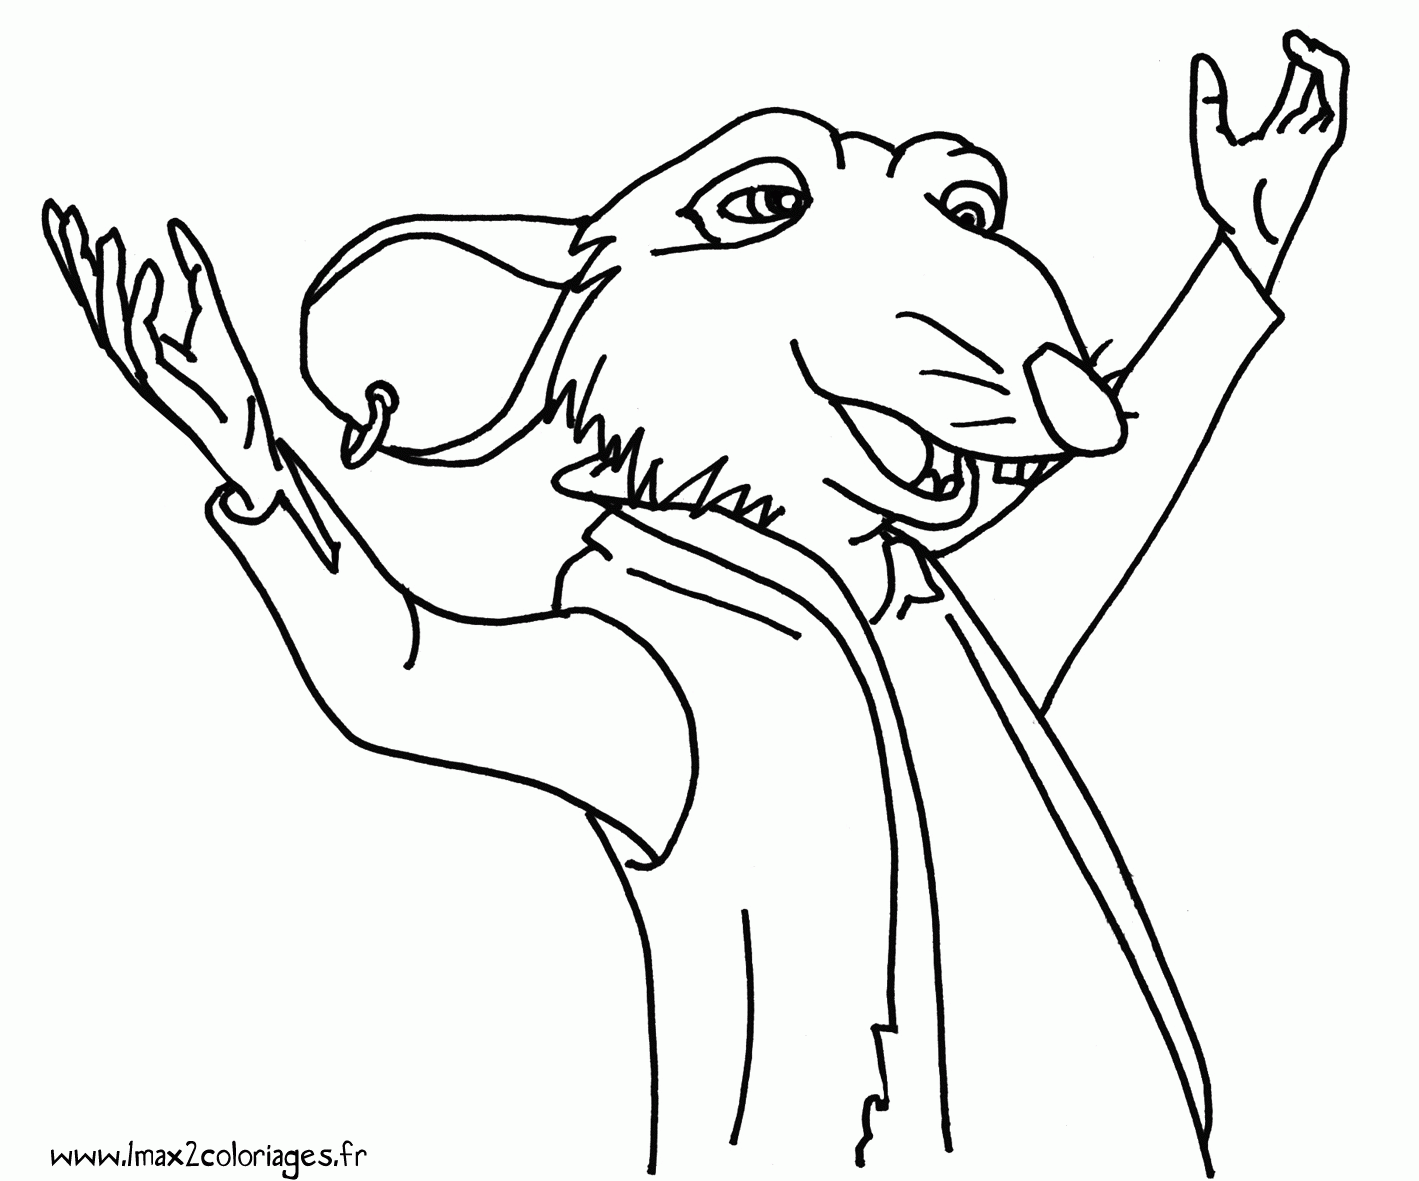 The Tale Of Despereaux Coloring Pages - Coloring Home